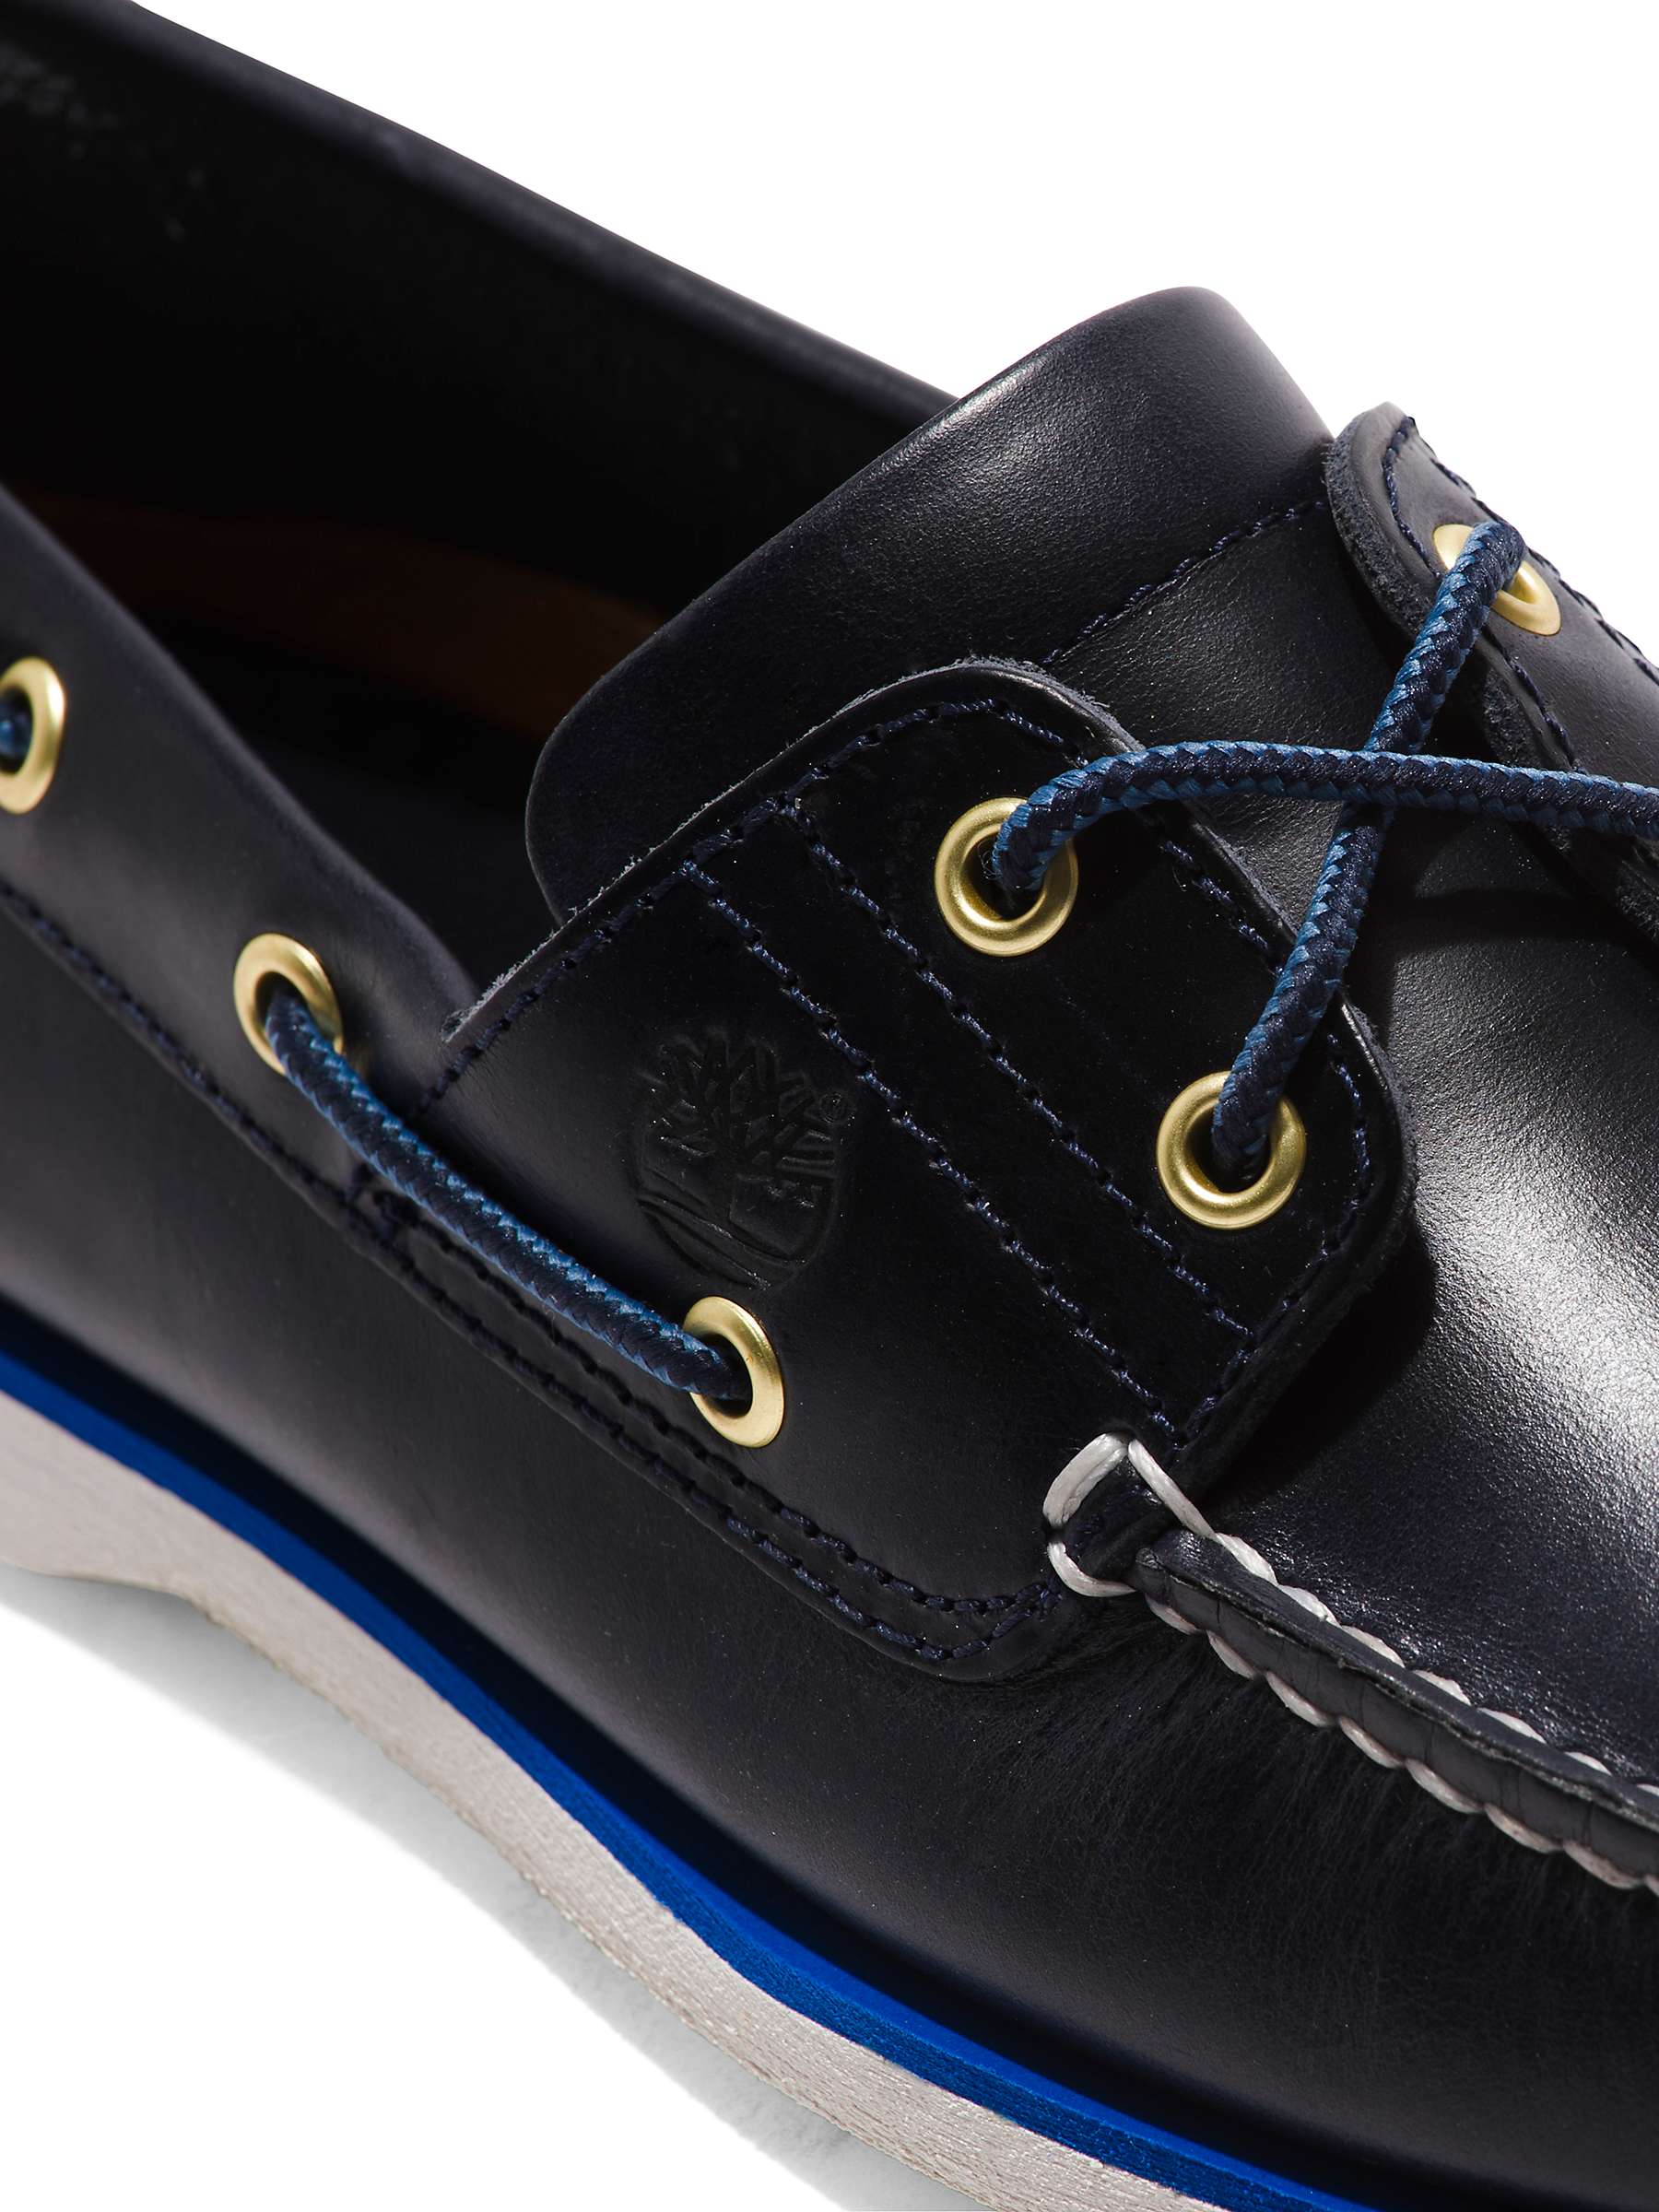 Timberland Classic Boat Shoes, Navy At John Lewis & Partners